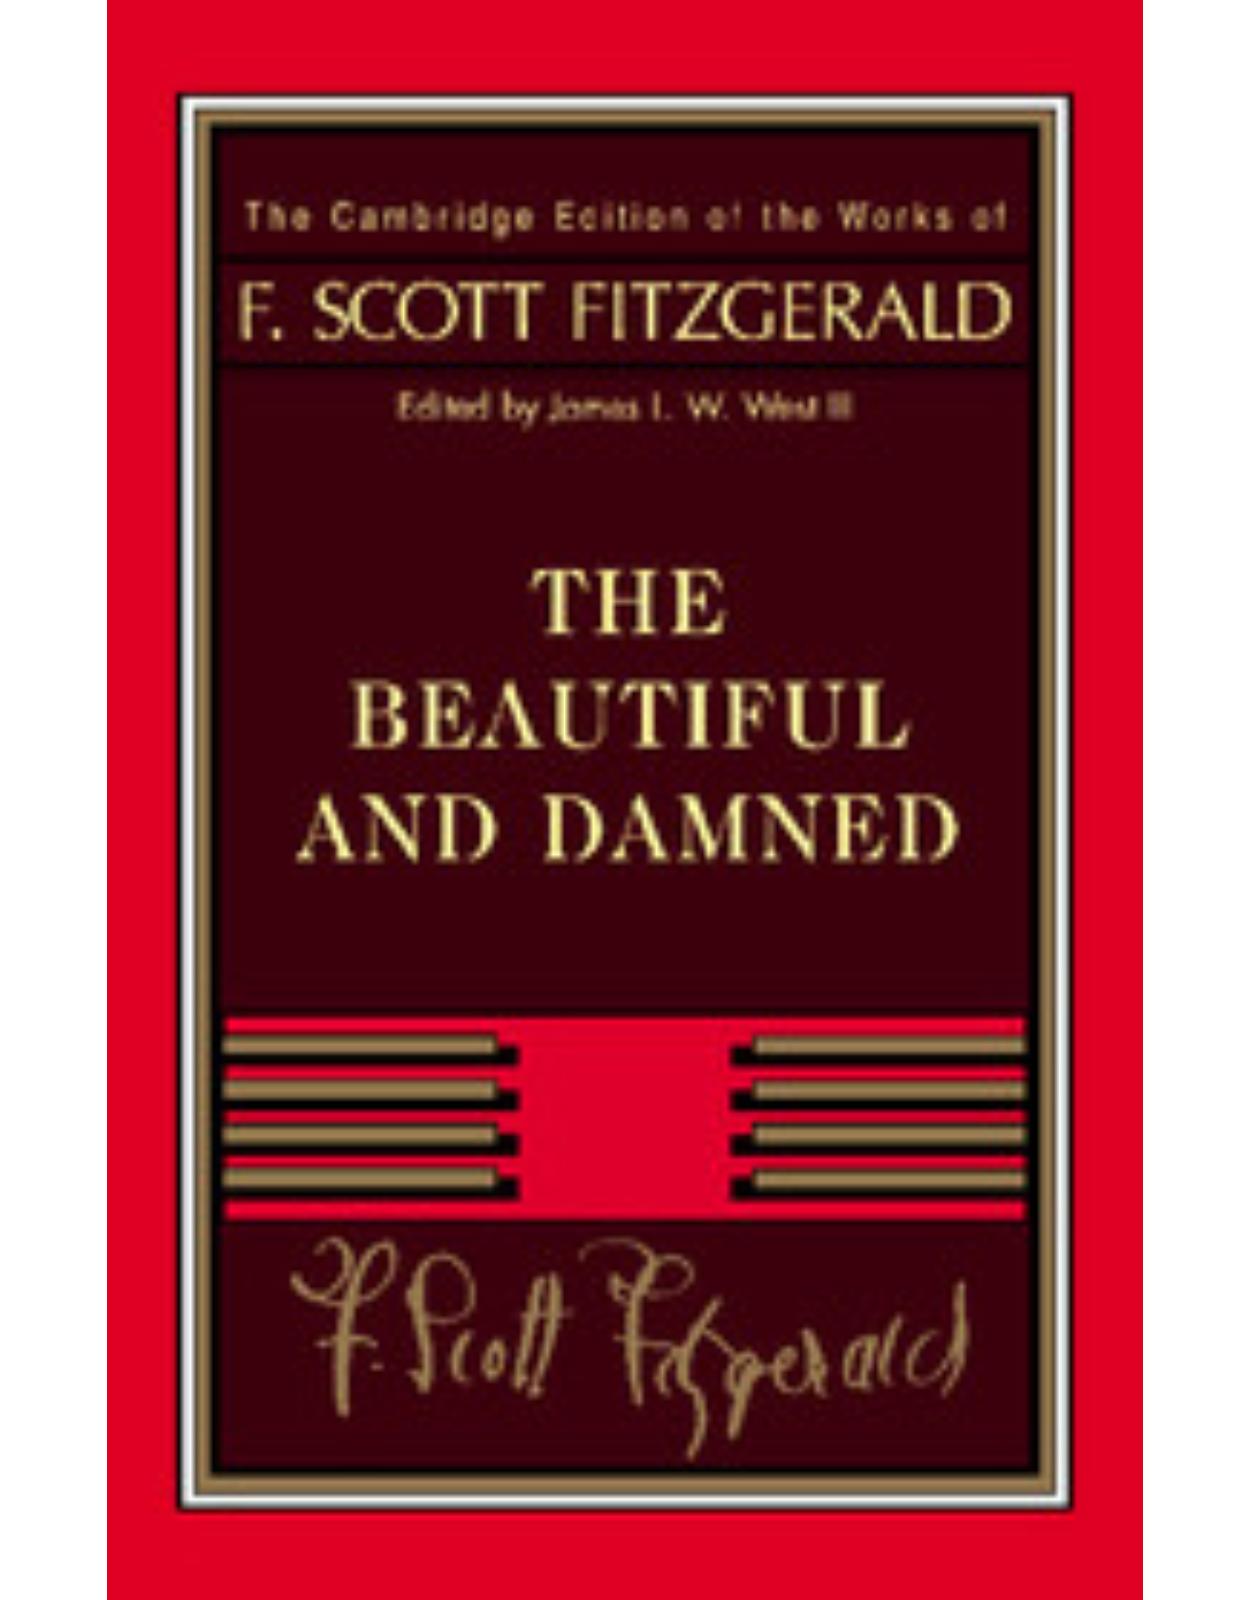 Fitzgerald: The Beautiful and Damned (The Cambridge Edition of the Works of F. Scott Fitzgerald)